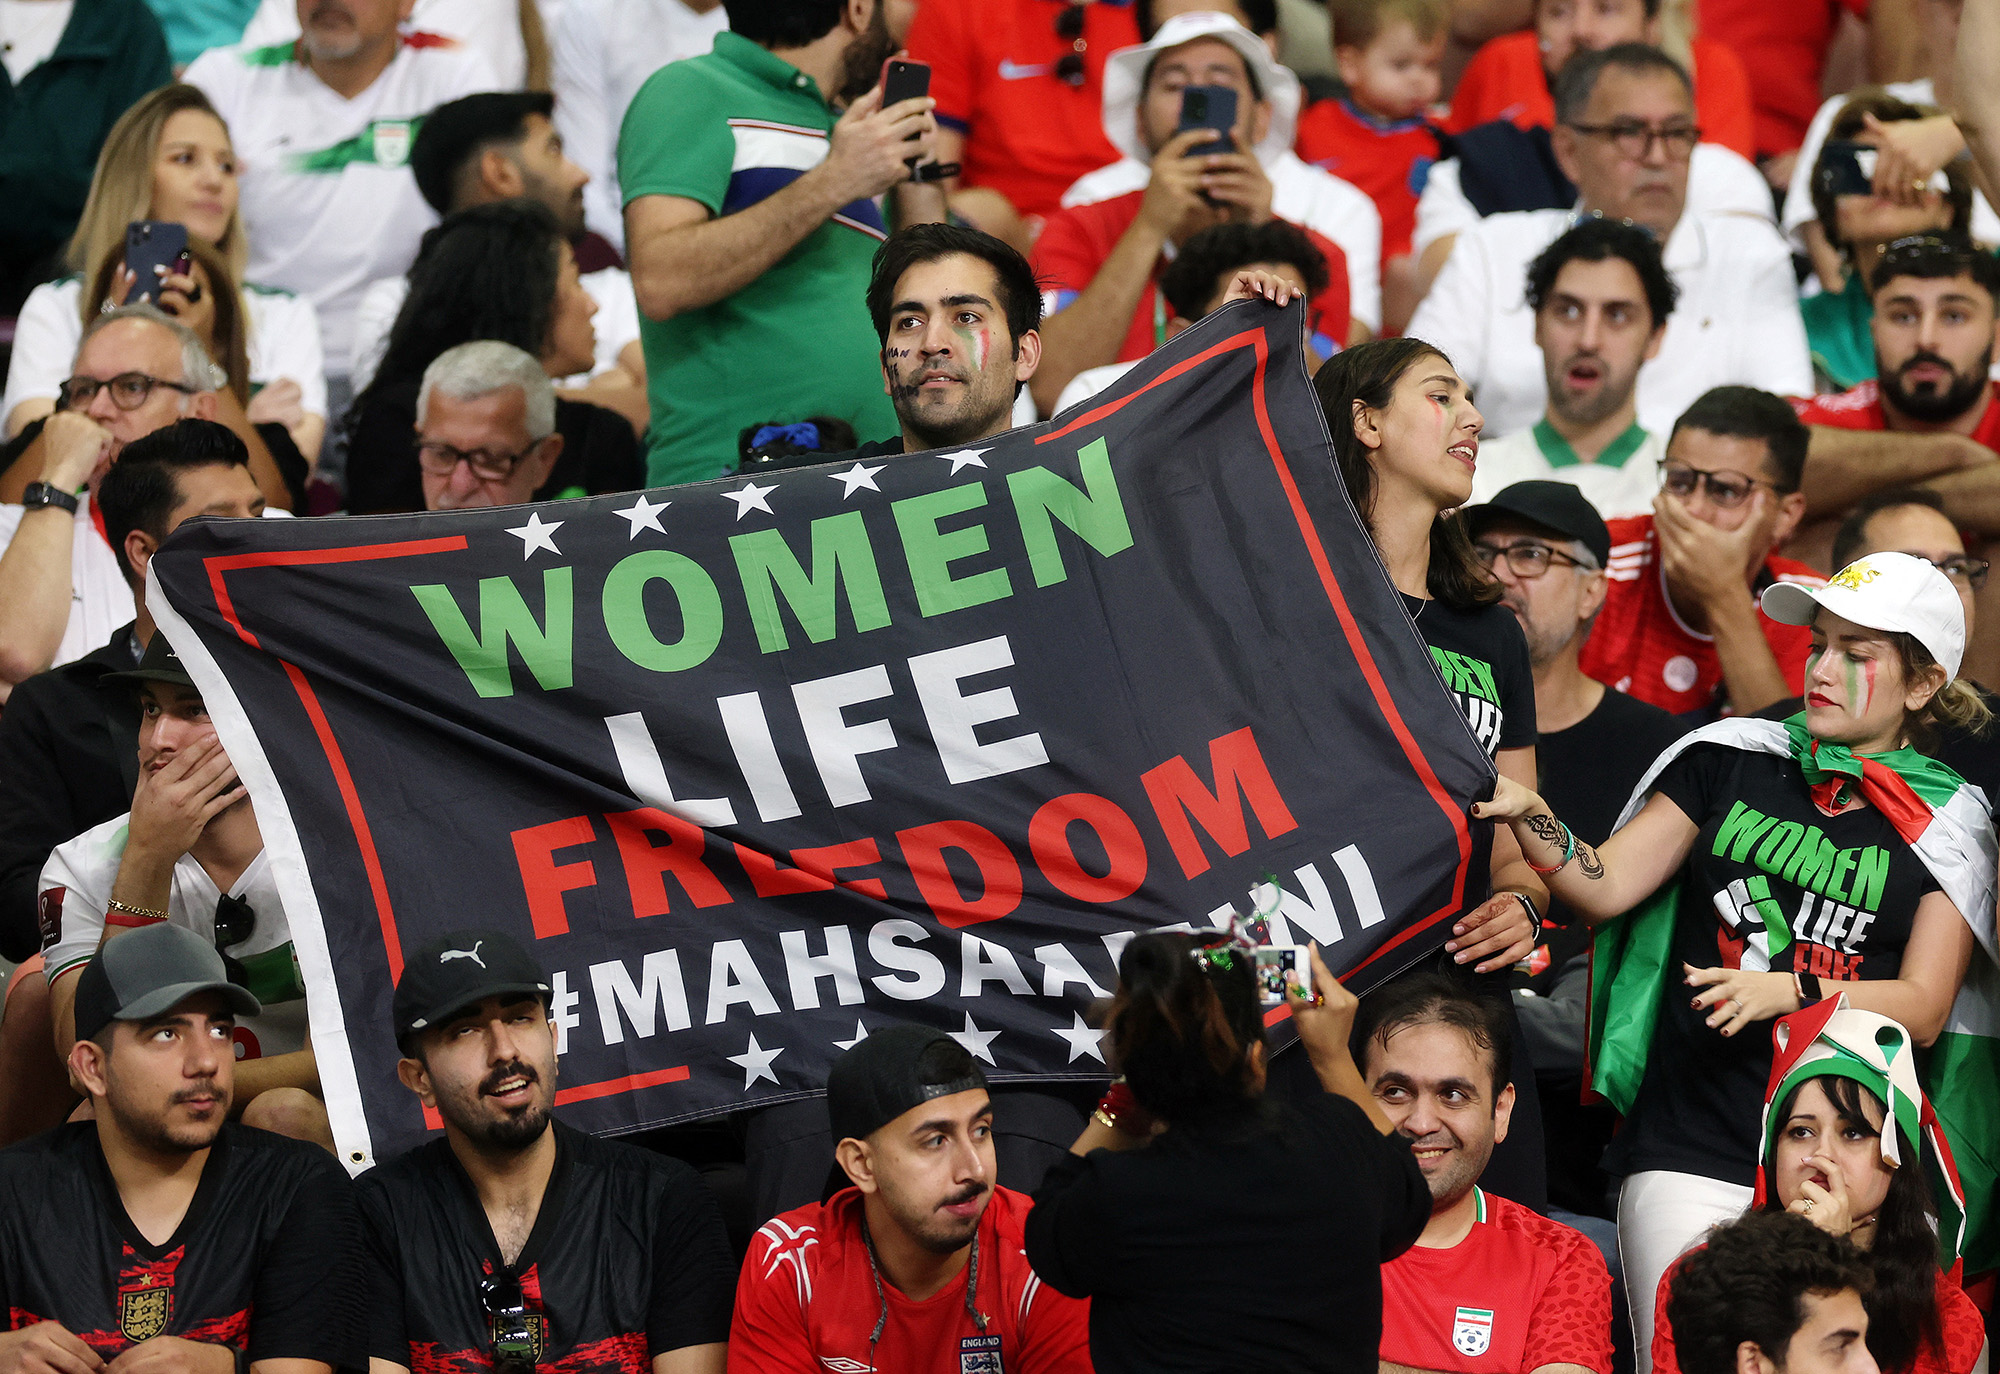 Iran fans hold a banner reading 'Woman life freedom' inside the stadium during the match vs England on November 21.